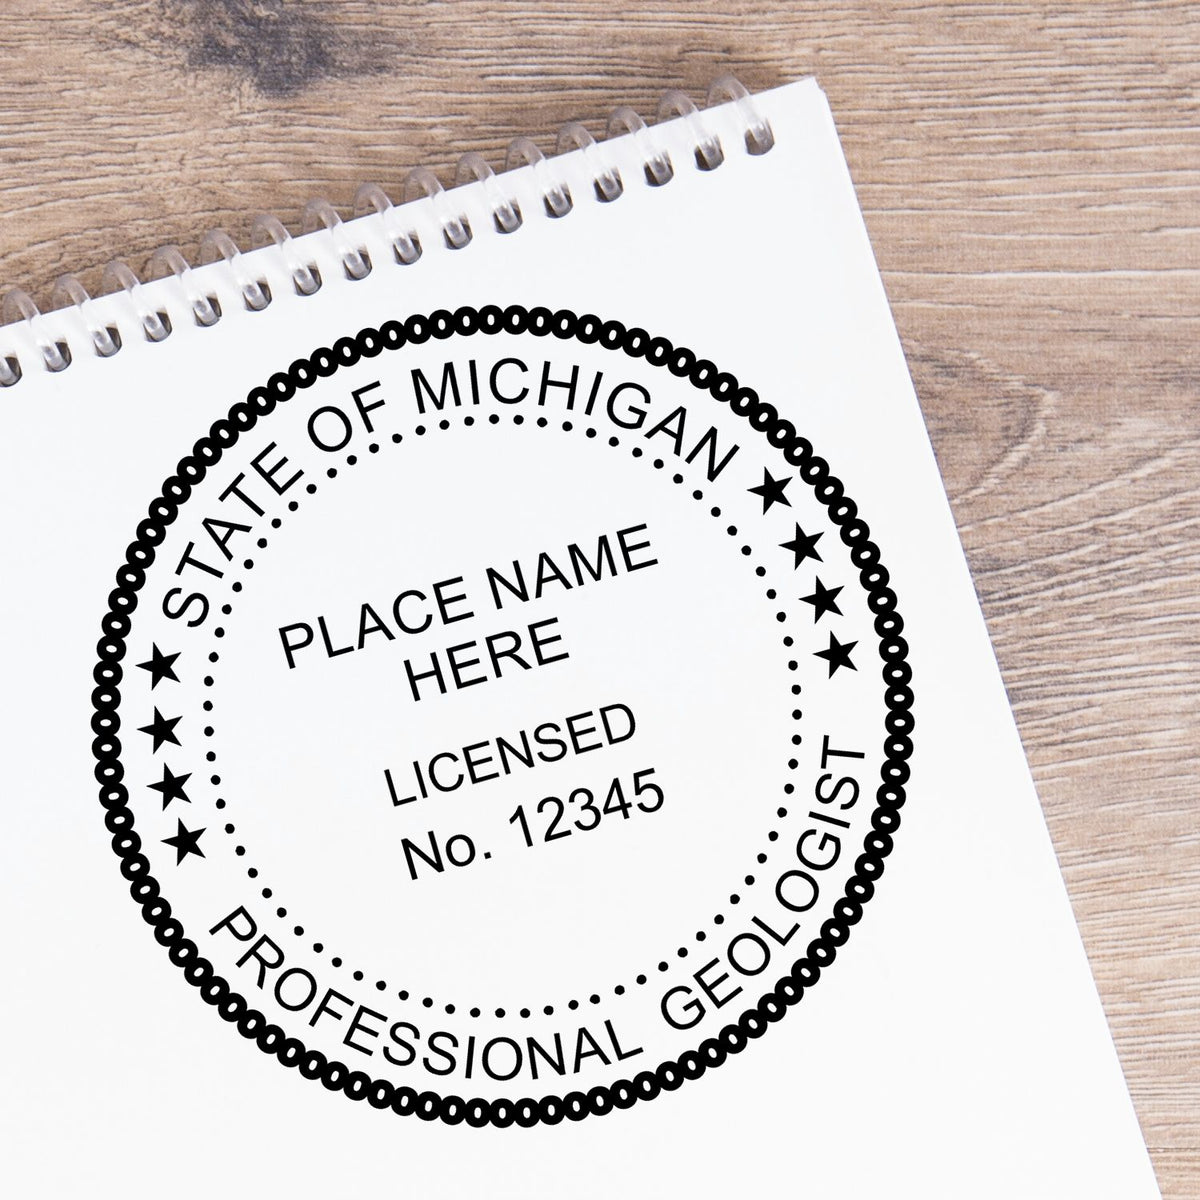 The Michigan Professional Geologist Seal Stamp stamp impression comes to life with a crisp, detailed image stamped on paper - showcasing true professional quality.